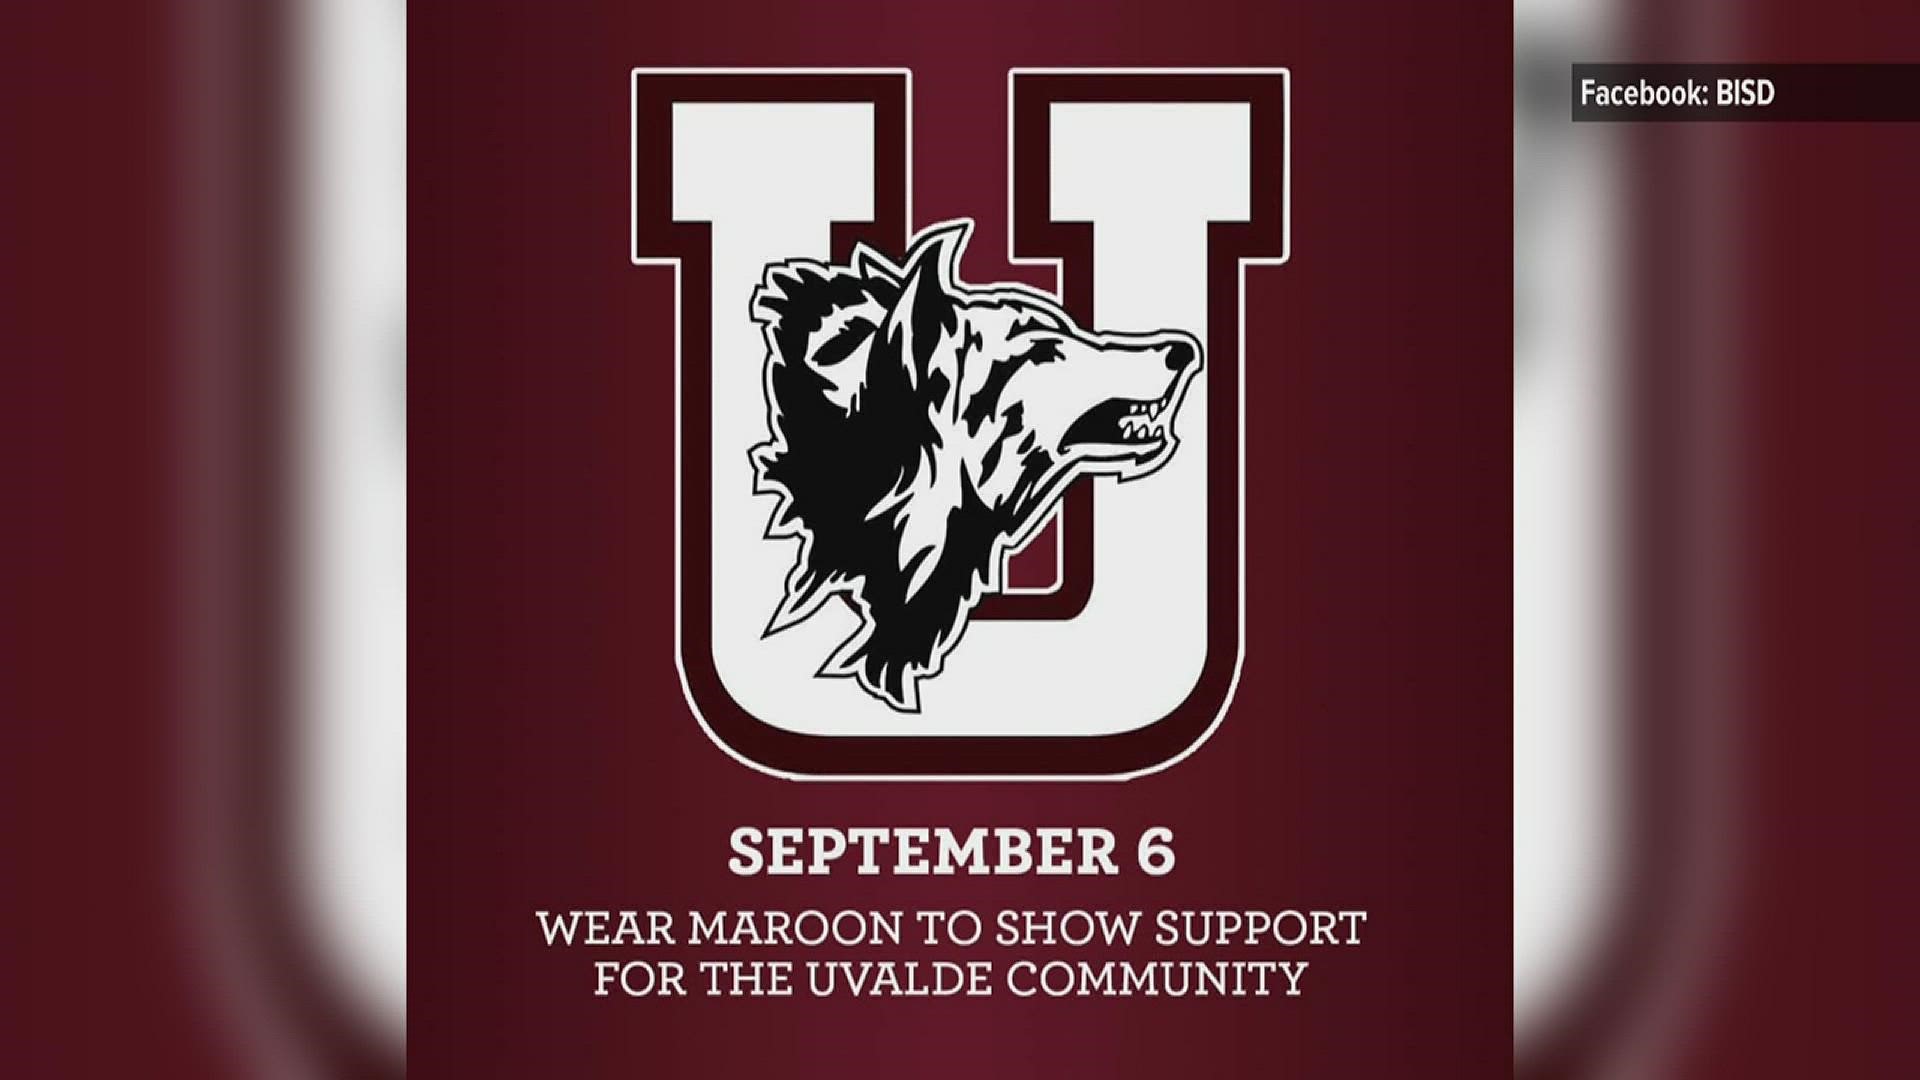 We have a list of area schools that are asking staff and students to wear maroon and white on our website, 12NewsNow.com.